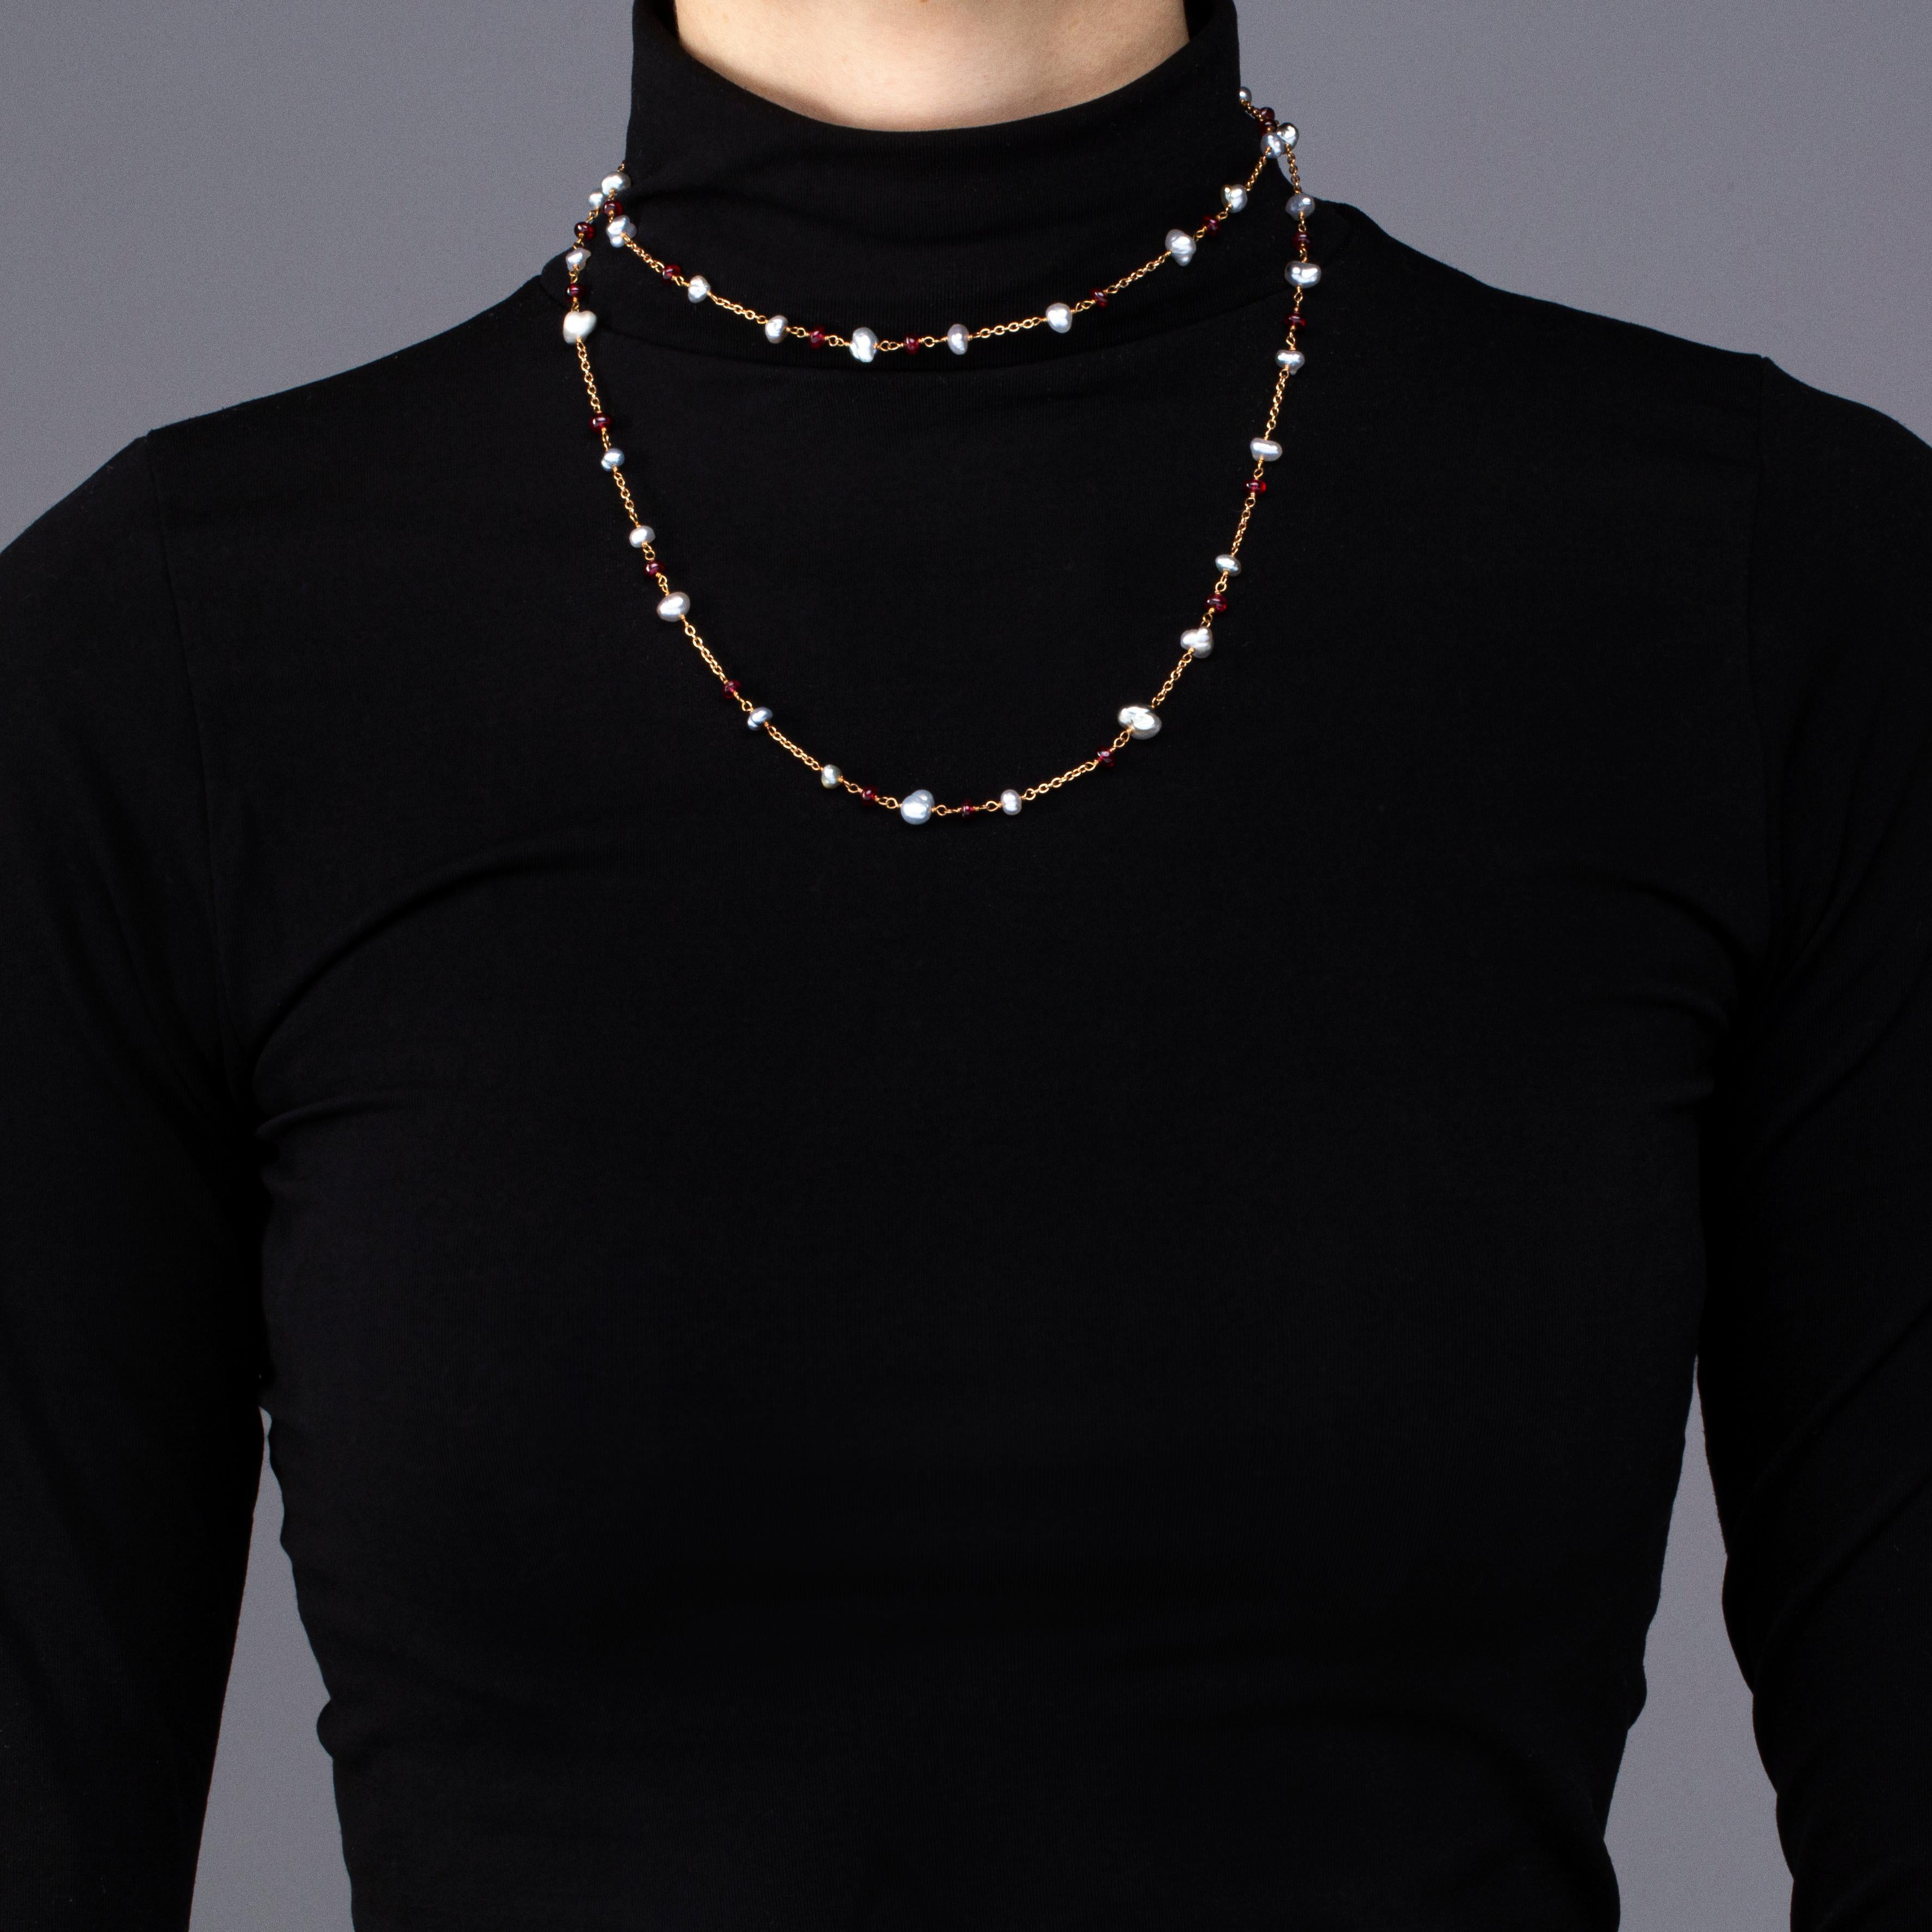 Alex Jona design collection, hand crafted in Italy, 18 karat rose gold keshi pearl and  cabochon spinel (49,40 carats) sautoir long necklace (Total length: 35.5inch/90 cm).

Alex Jona jewels stand out, not only for their special design and for the